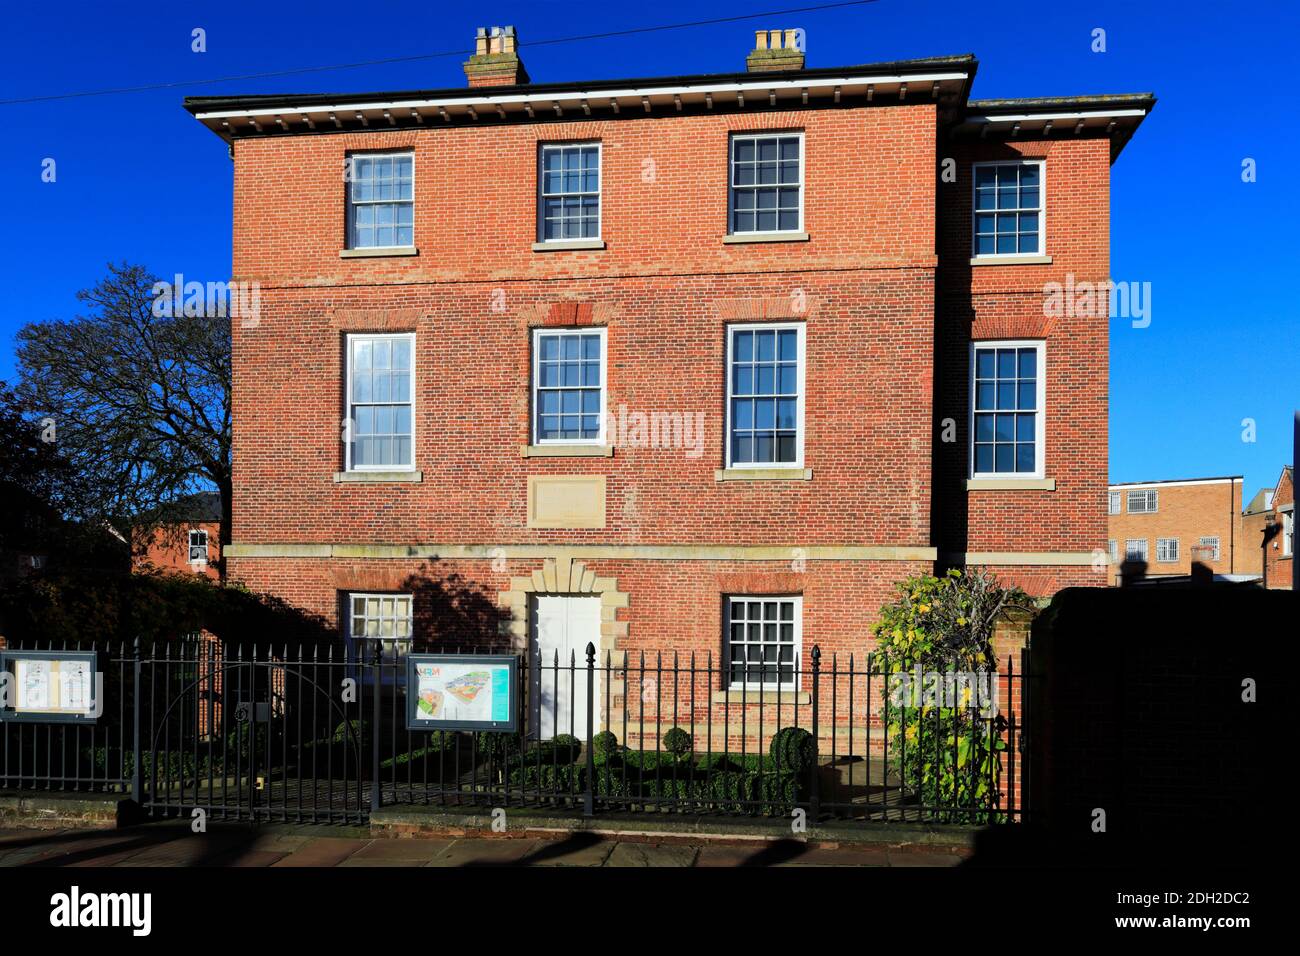 The Palace House, Horse Racing Museum, Newmarket Town, Suffolk, England, Großbritannien Stockfoto